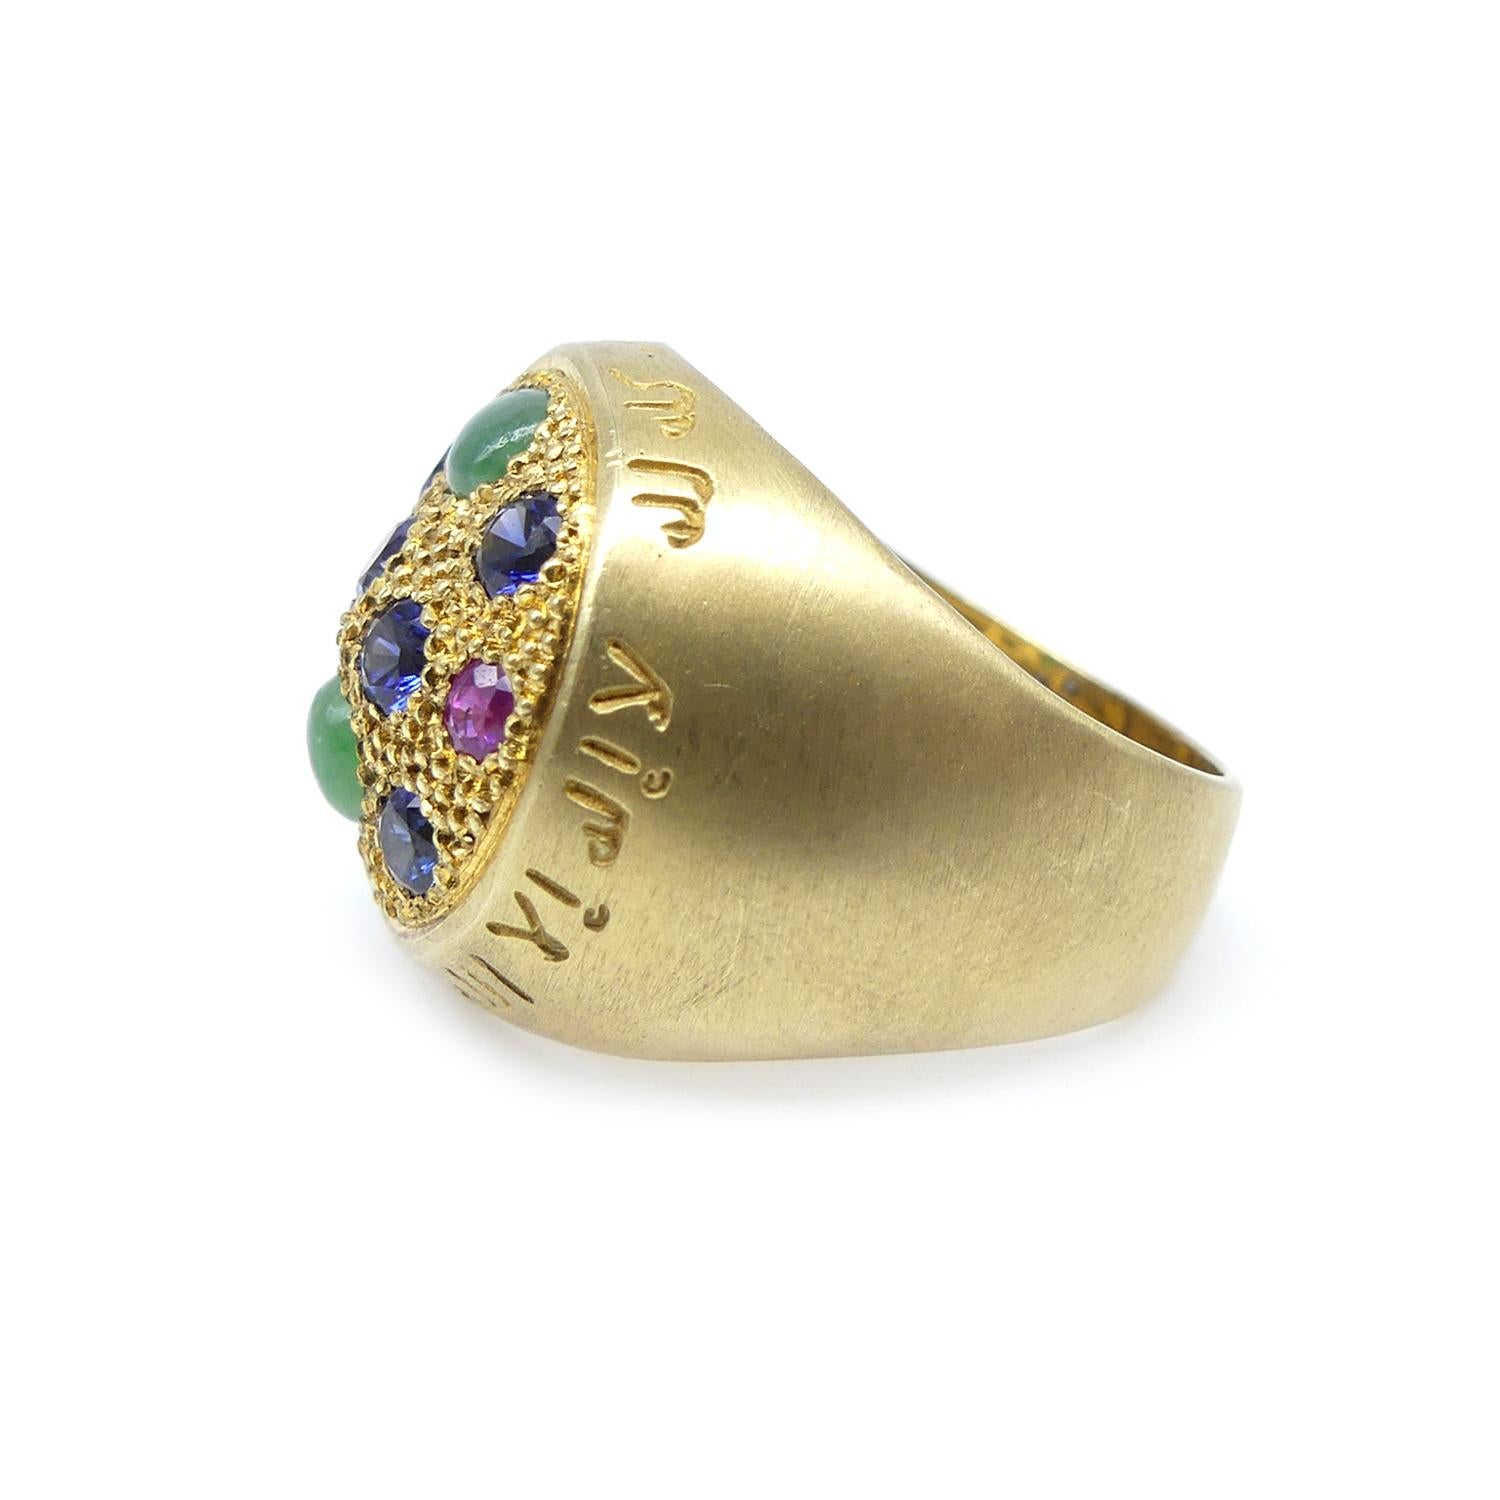 Modern 21st Century Jade Rubies Sapphires Silver Gold Plated Dome Ring Alhambra